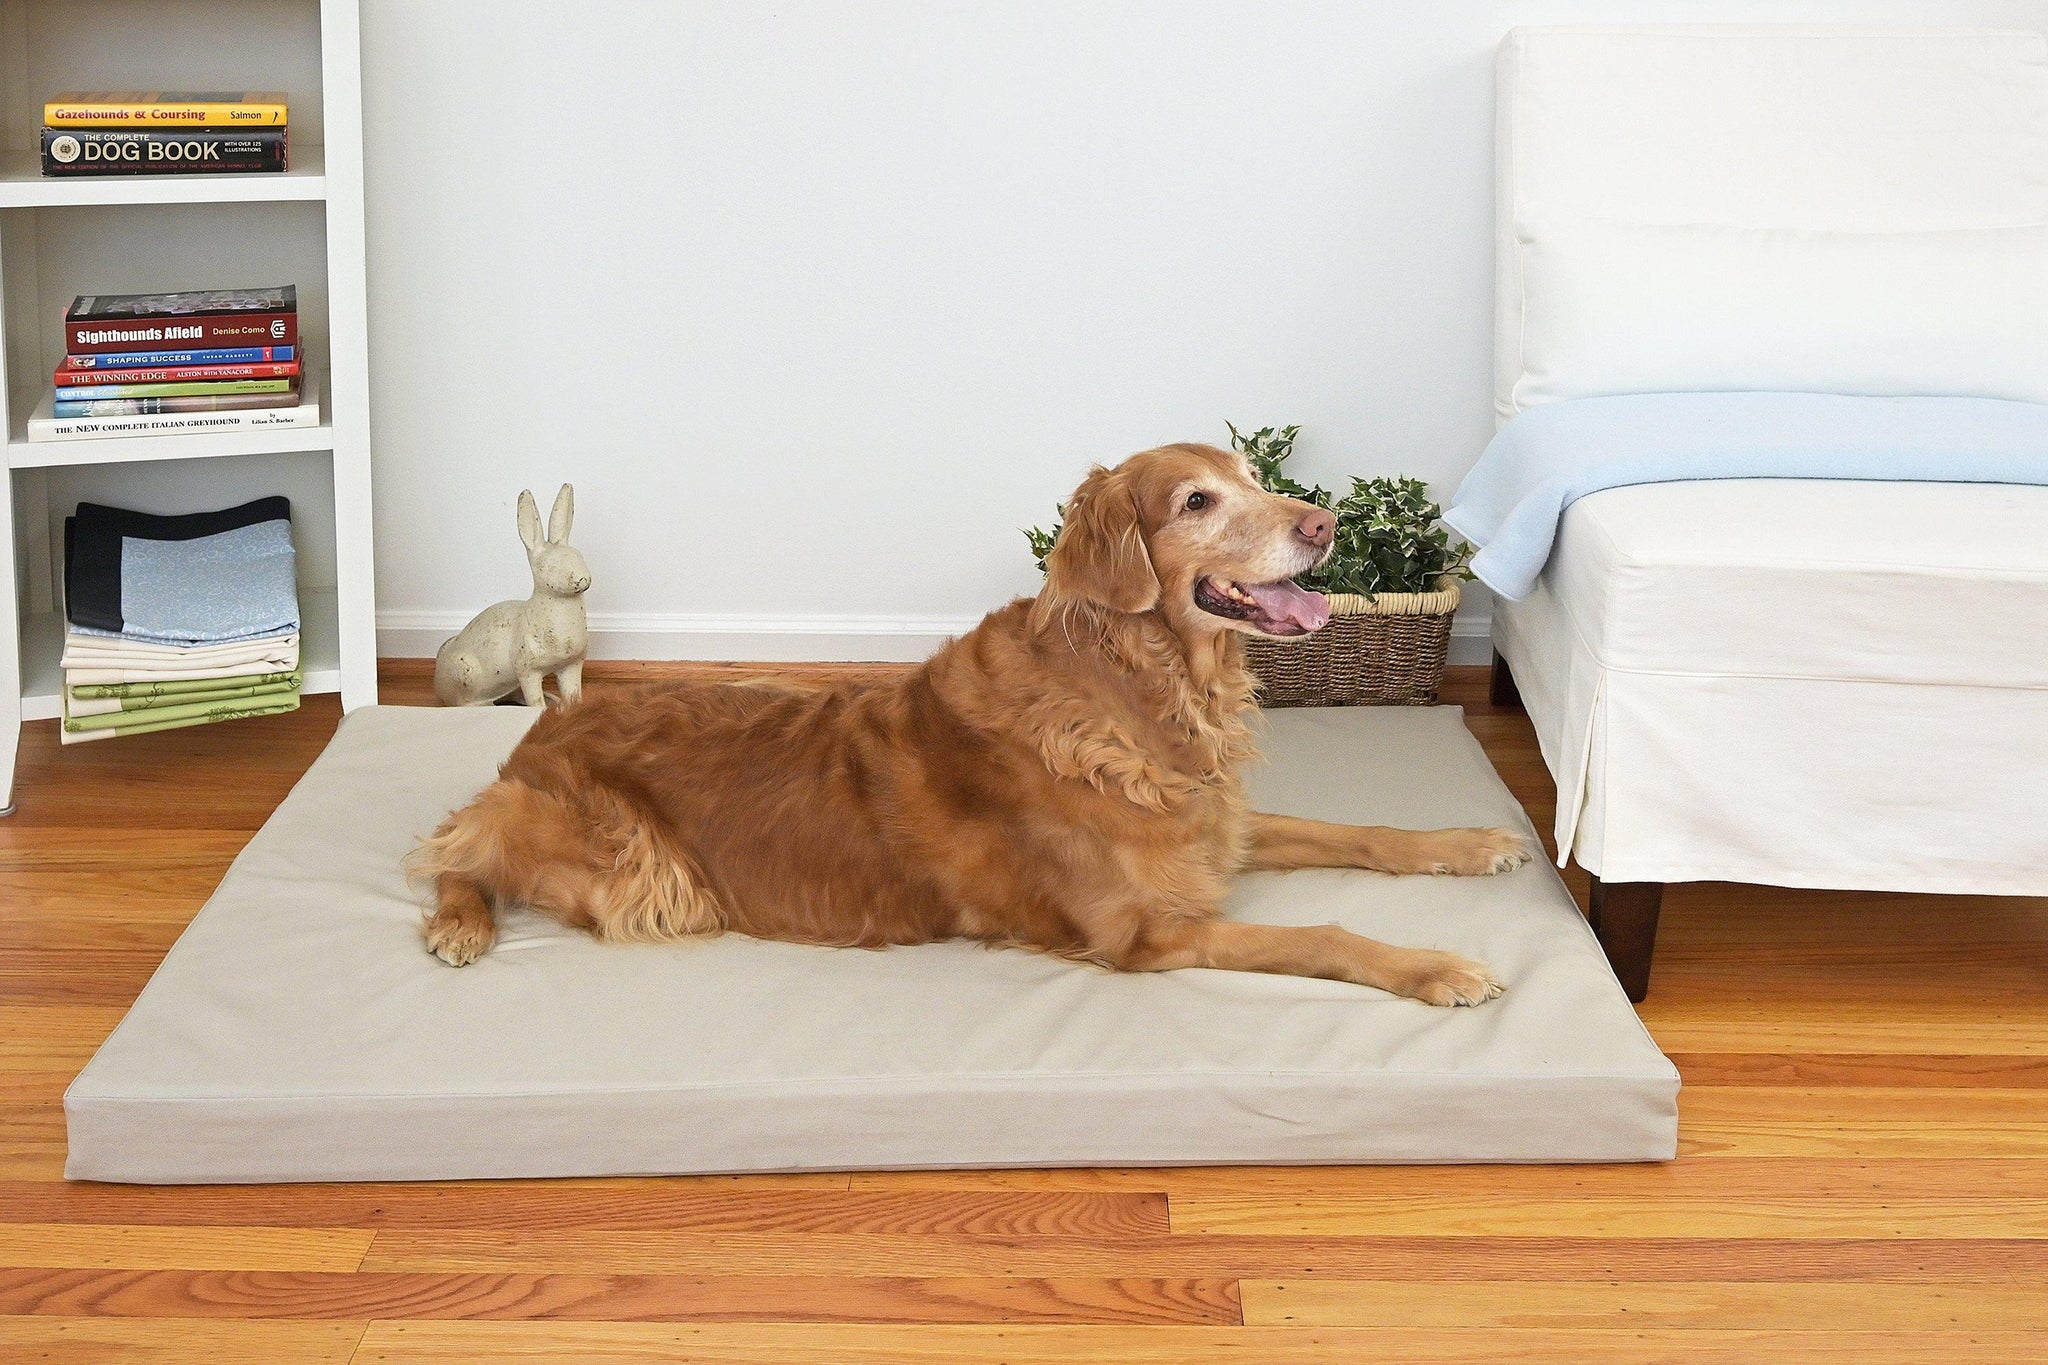 dog laying on organic cotton dog bed cover in stone canvas